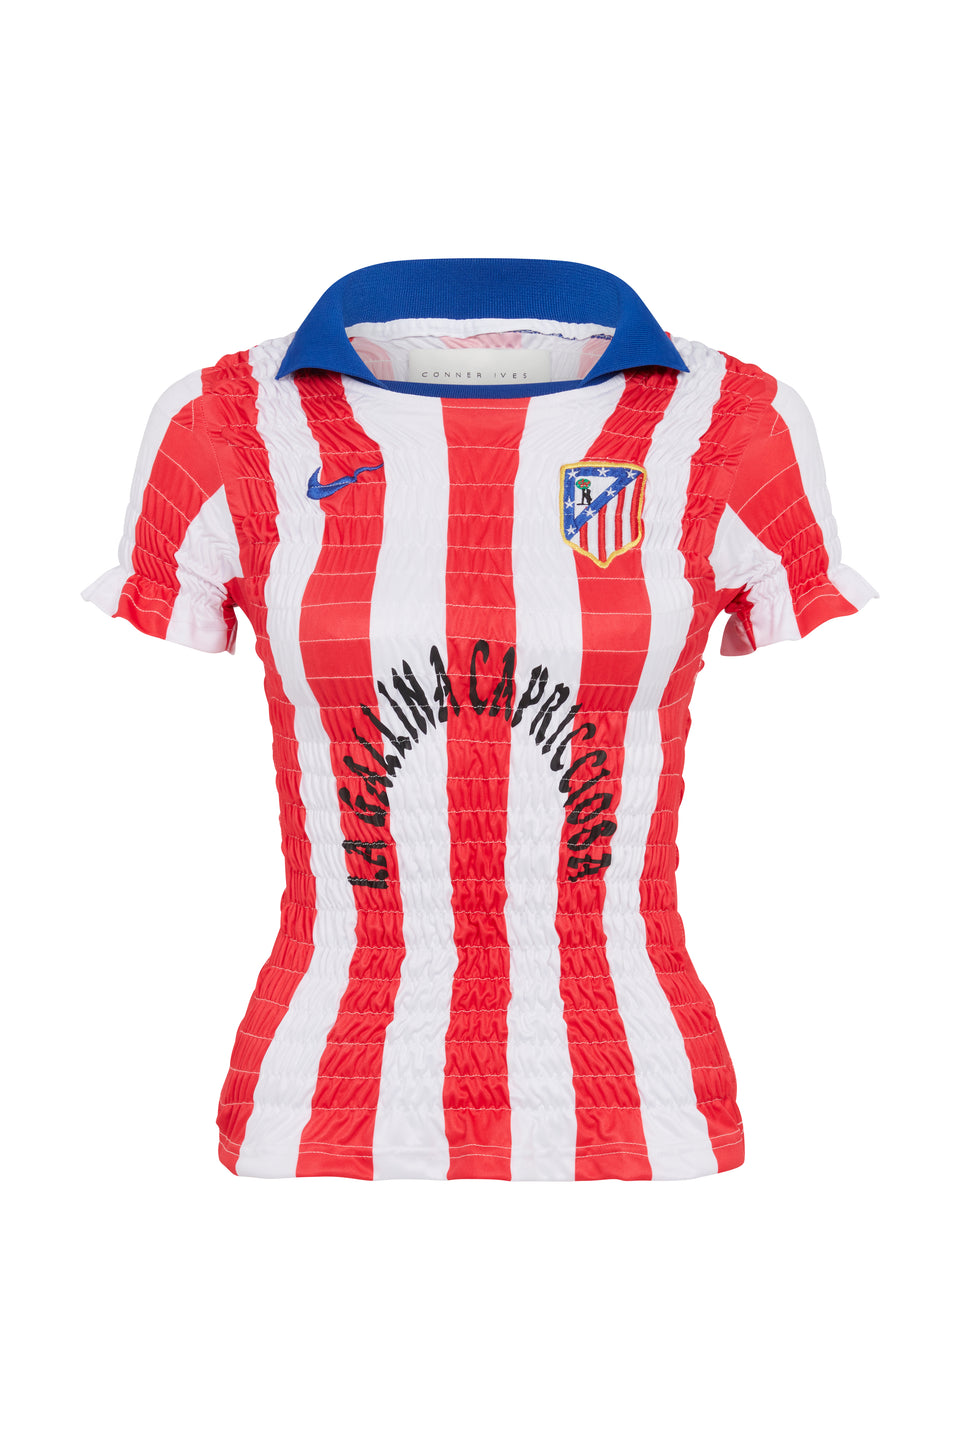 The Reconstituted Shirred Football Top